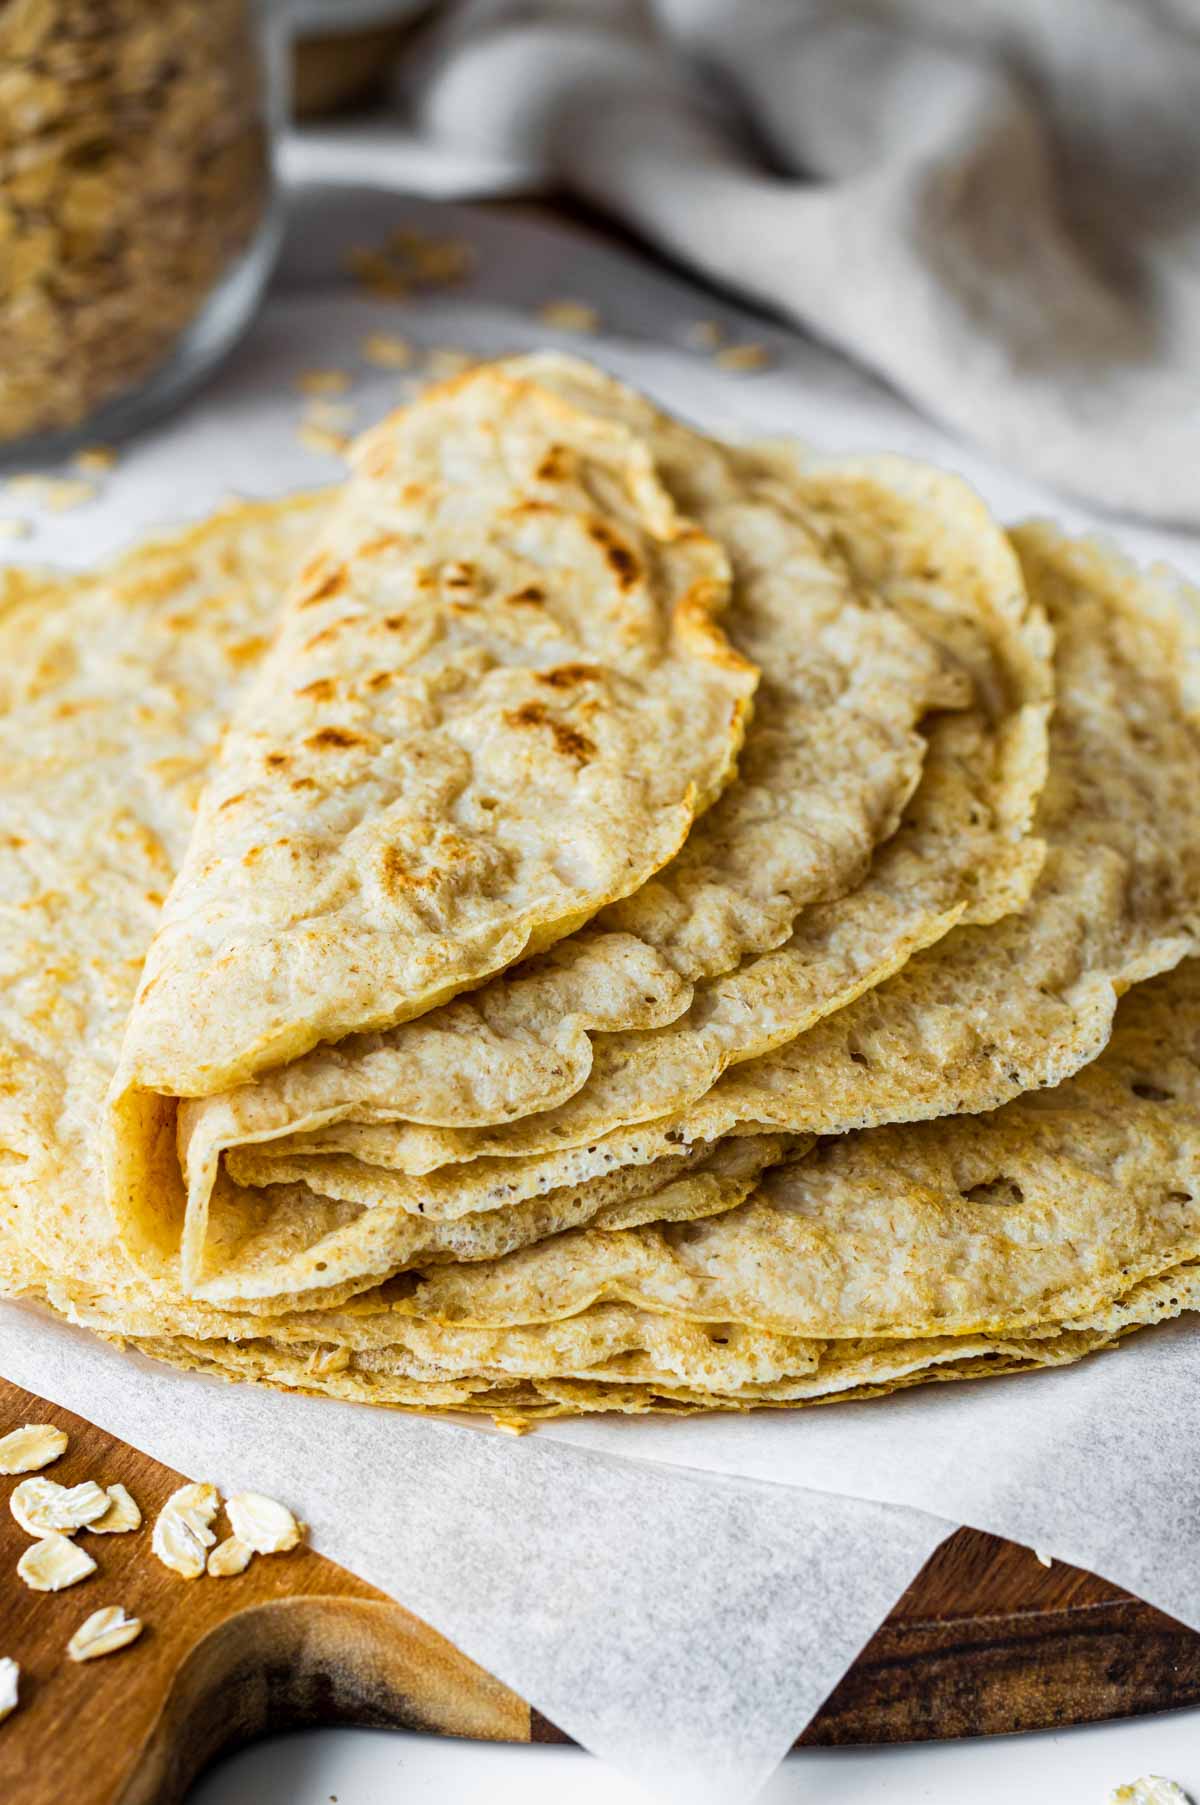 Folded oat tortillas served on a round wooden board layered with parchment paper.